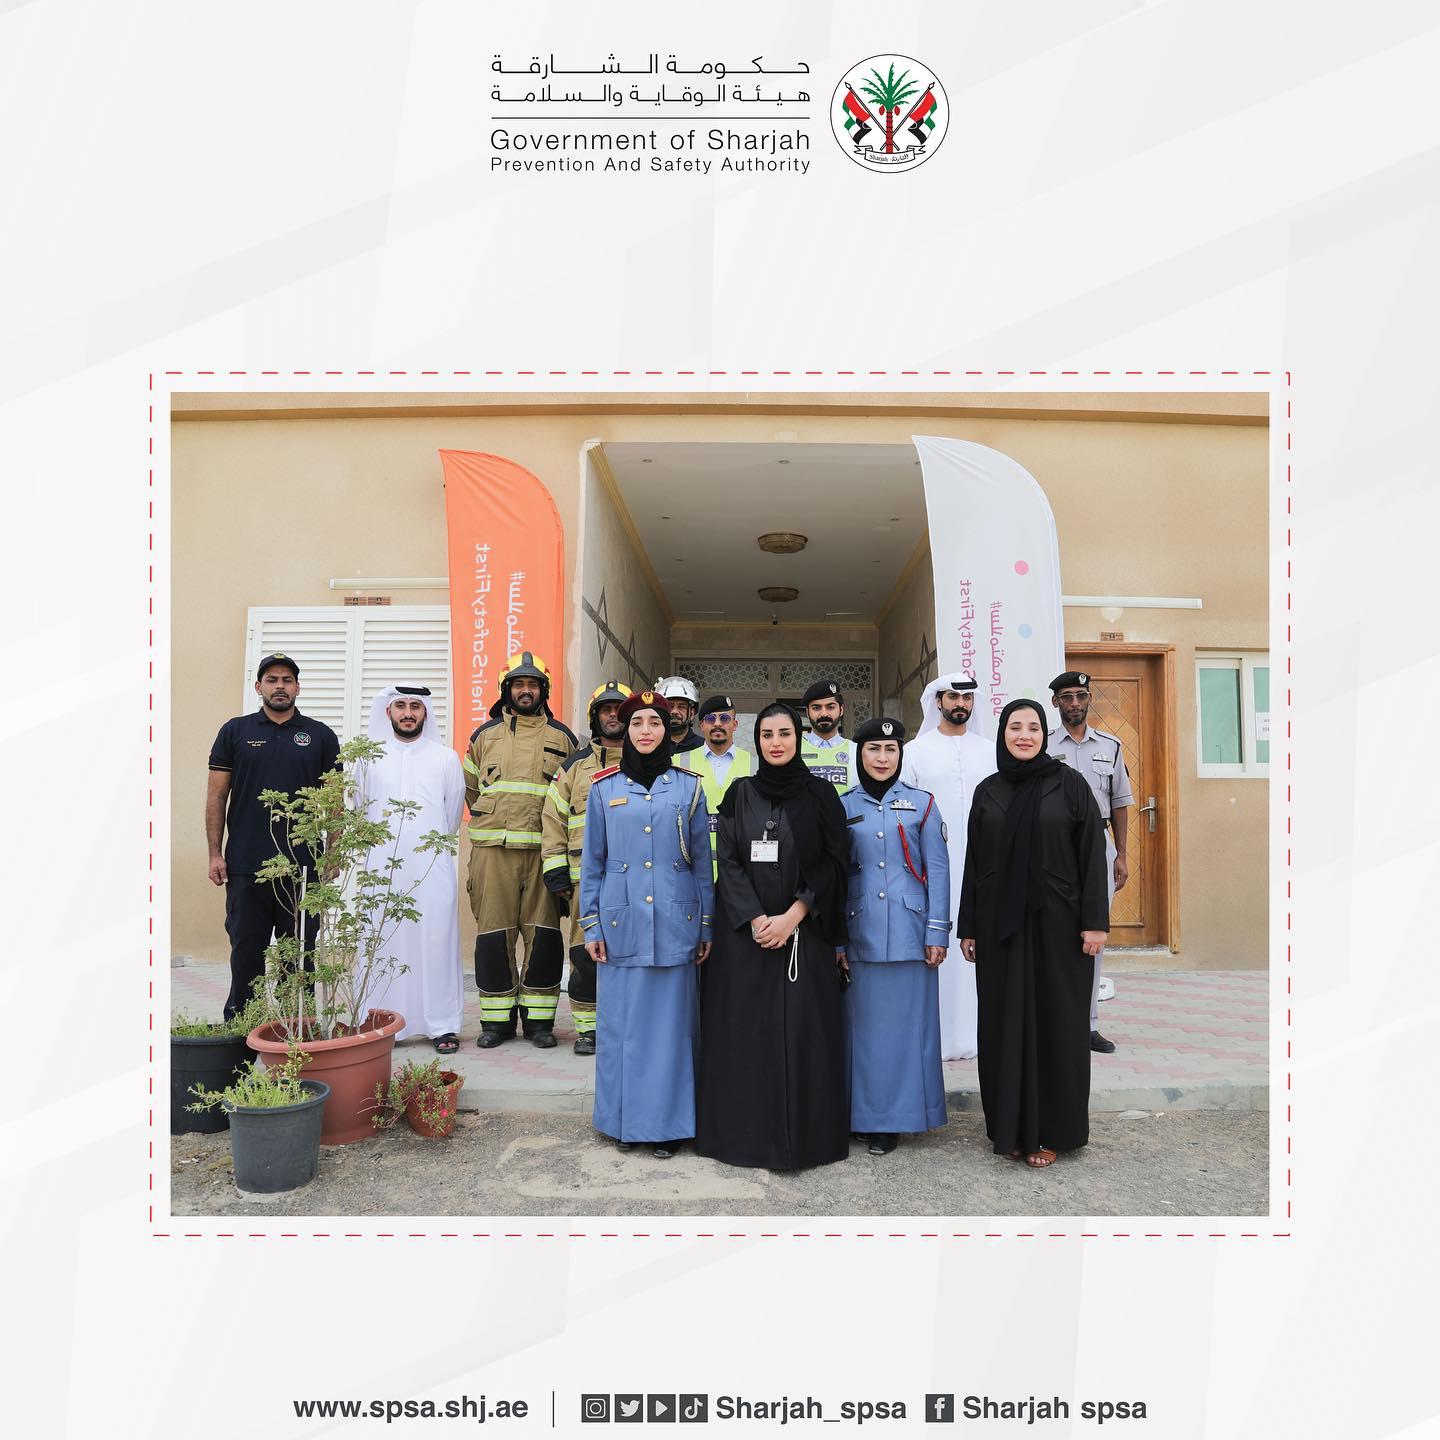 Field visits to residential buildings in the eastern and central regions of the Emirate of Sharjah